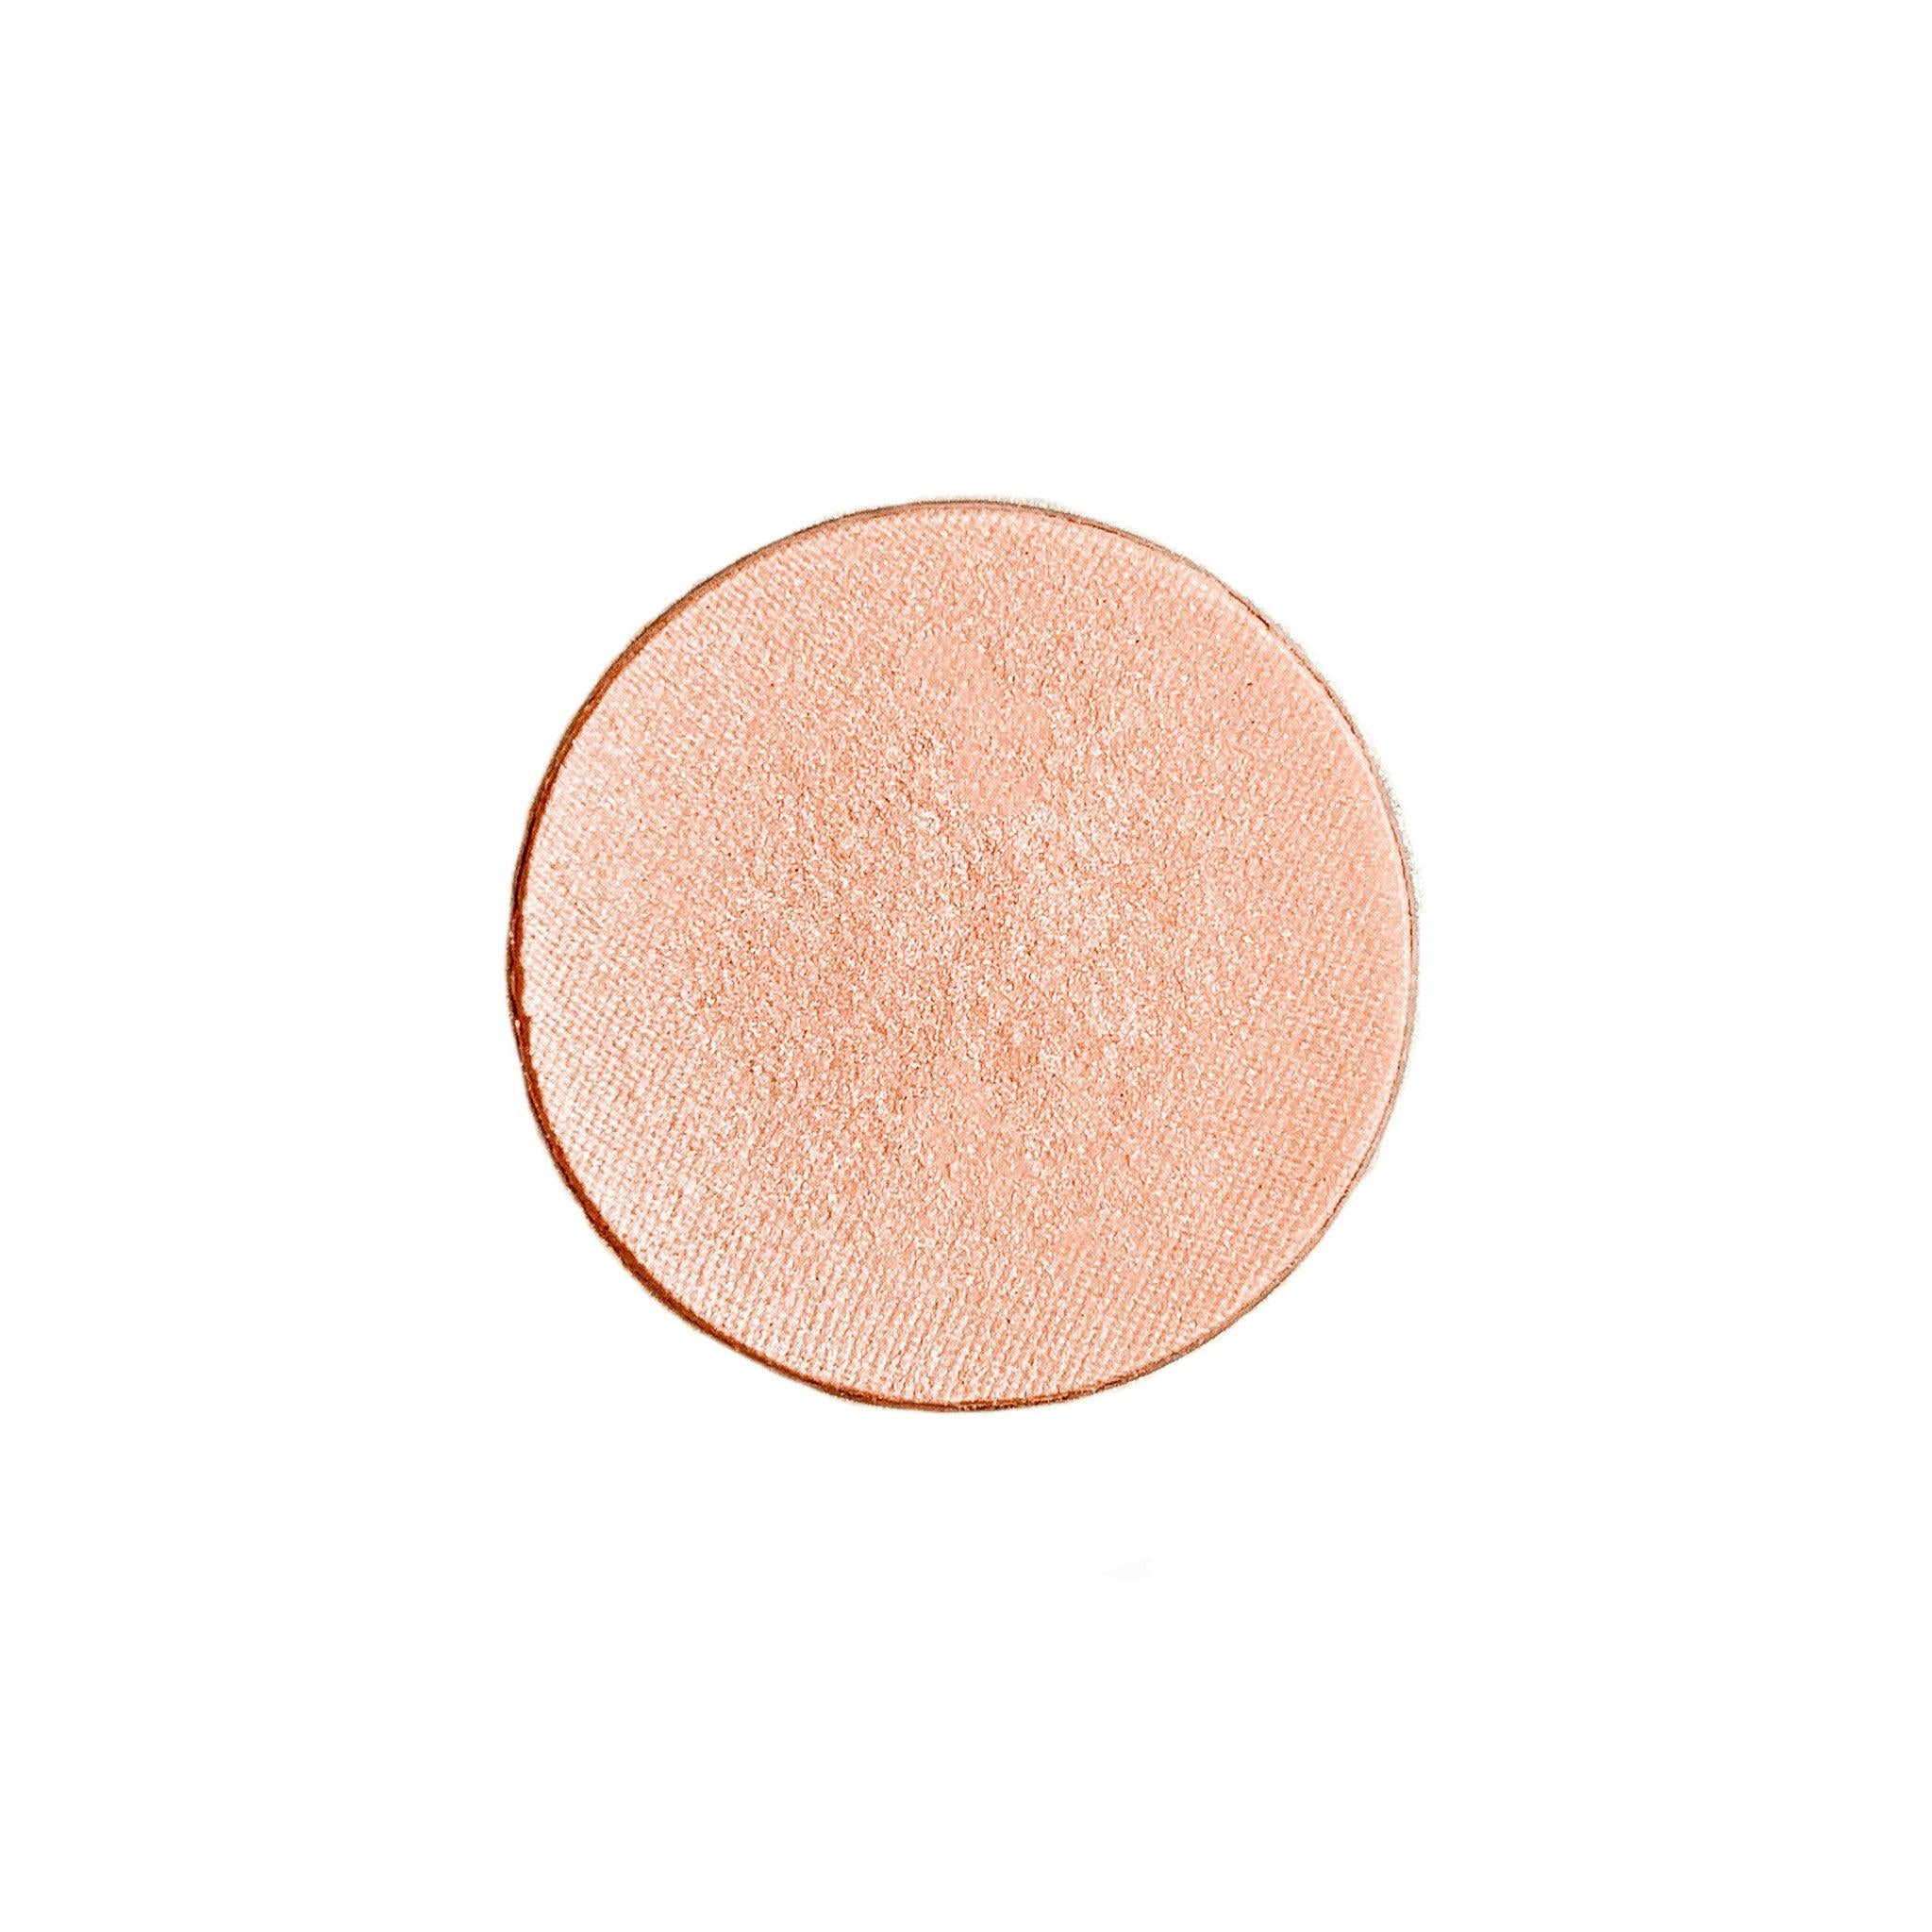 & withSimplicity | Organic Natural Pressed Eyeshadow